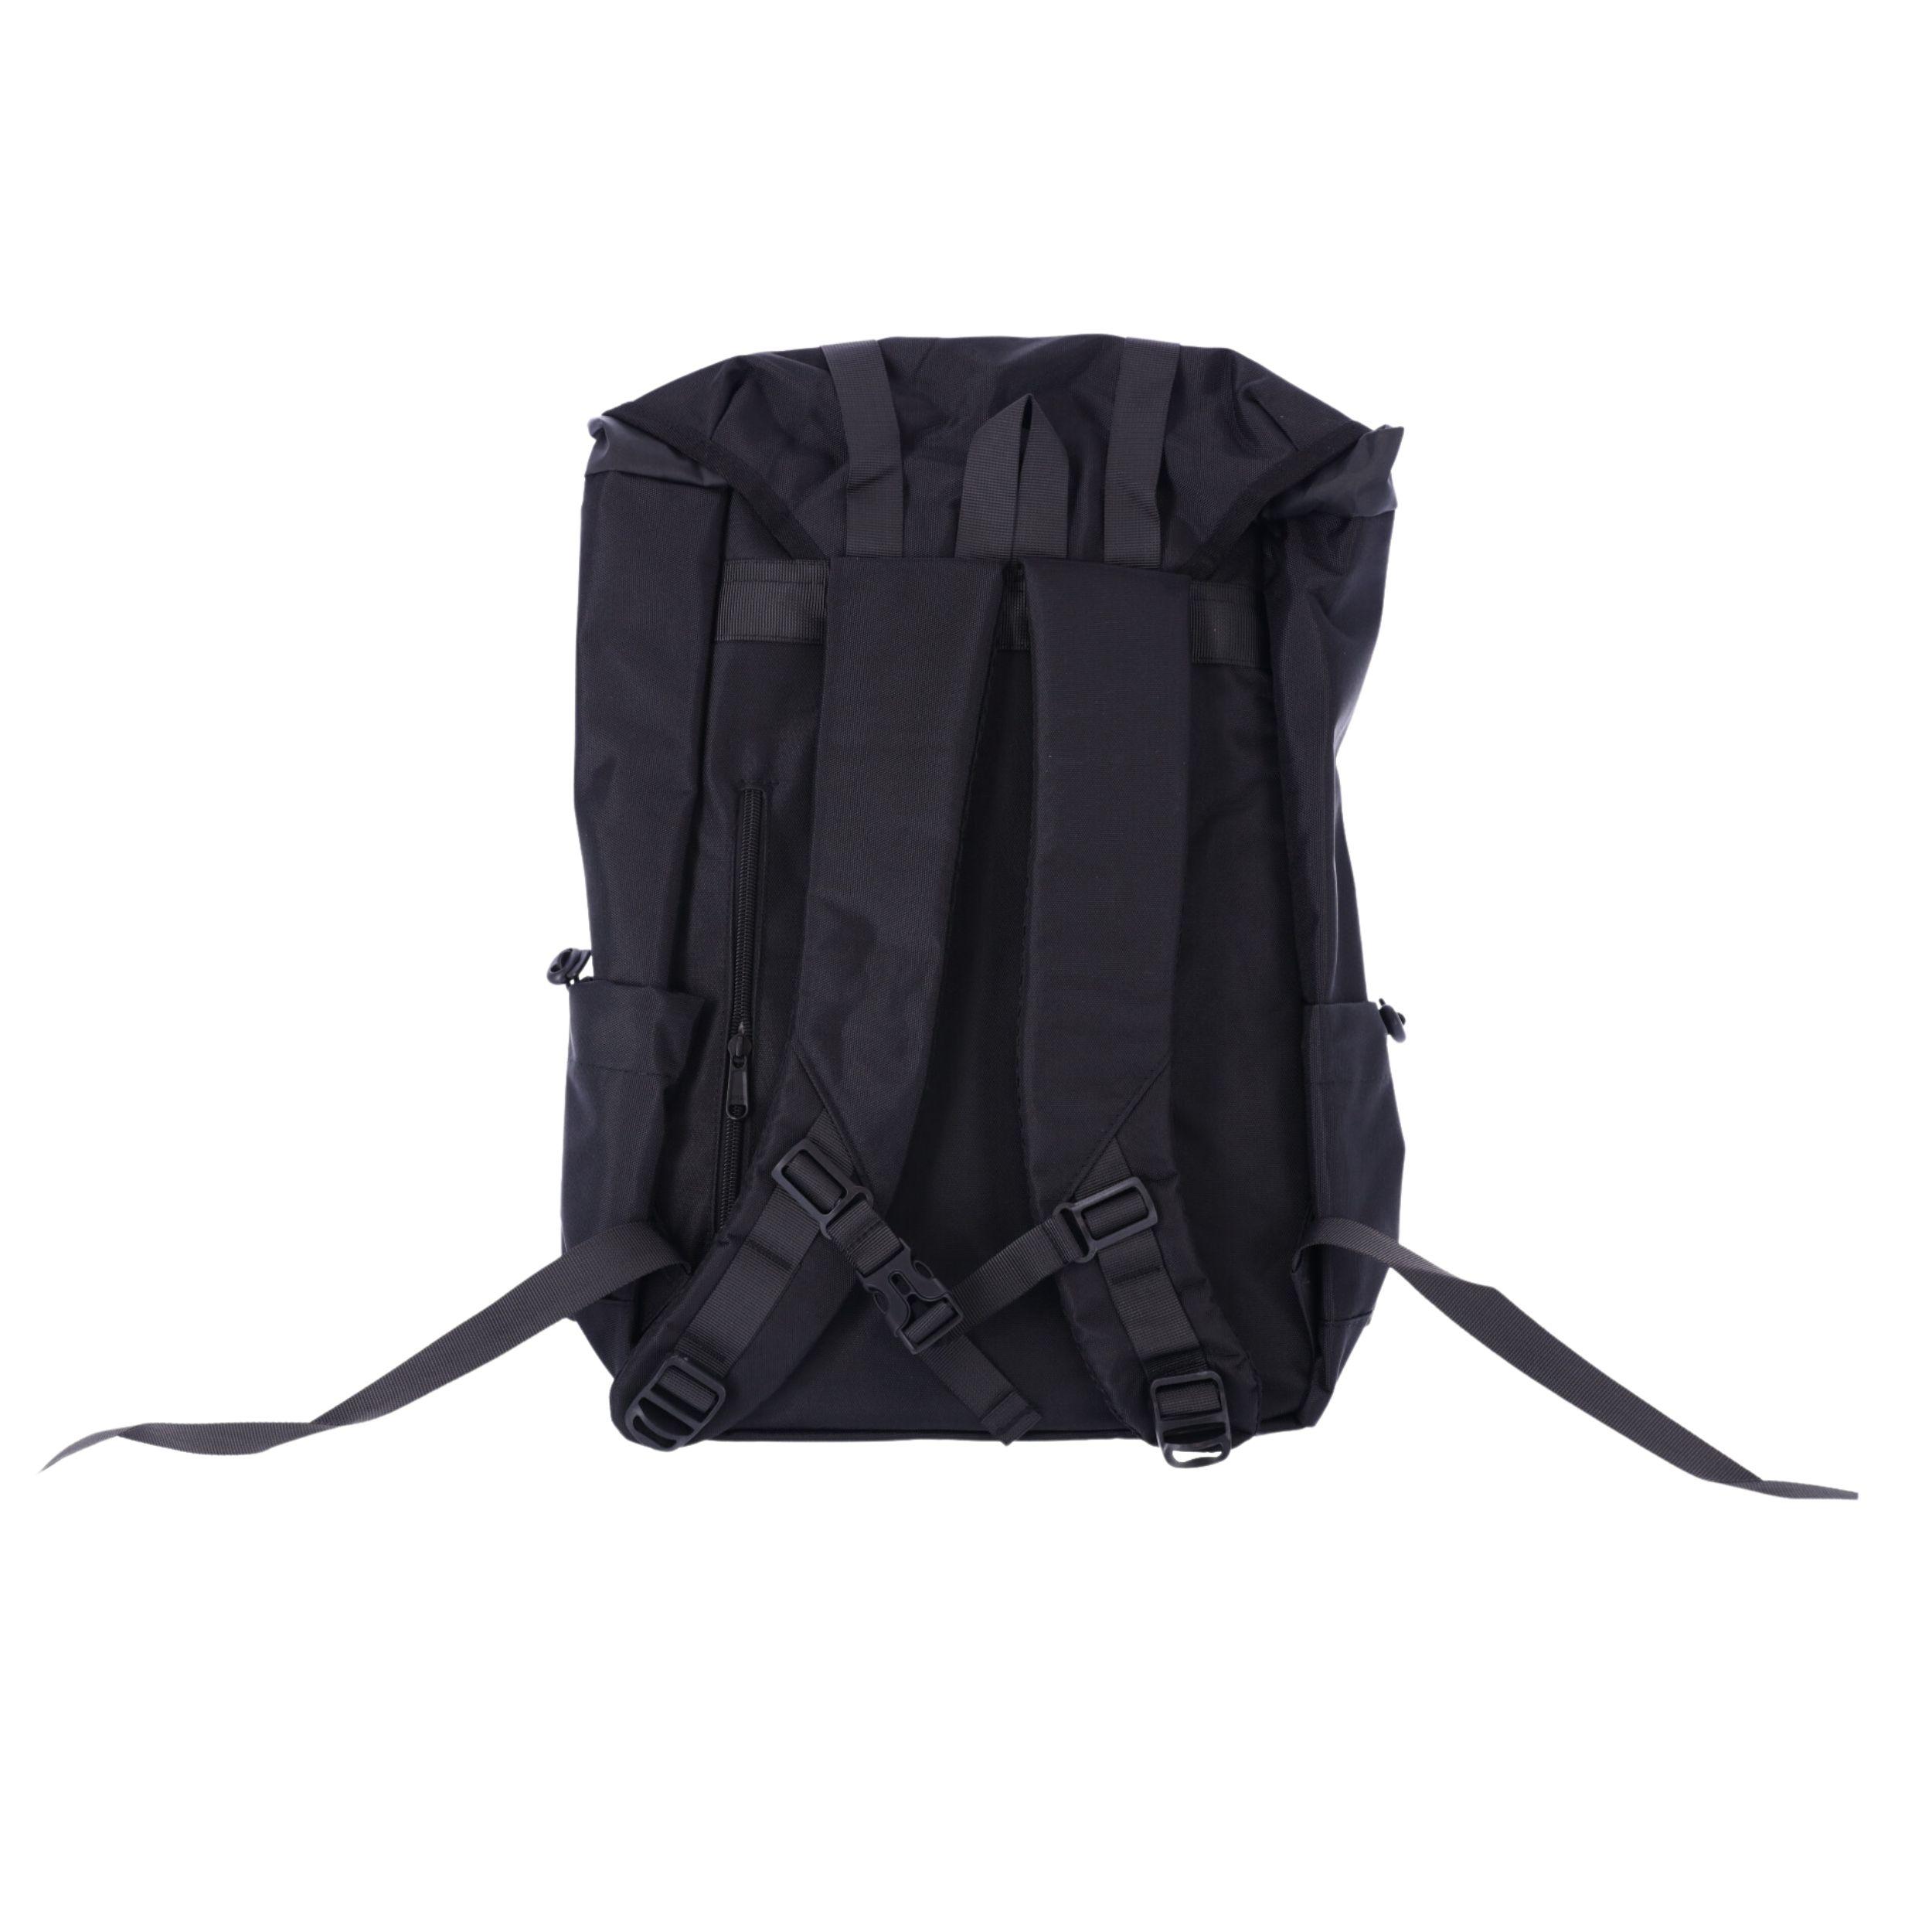 Travel backpack with space for a laptop - black